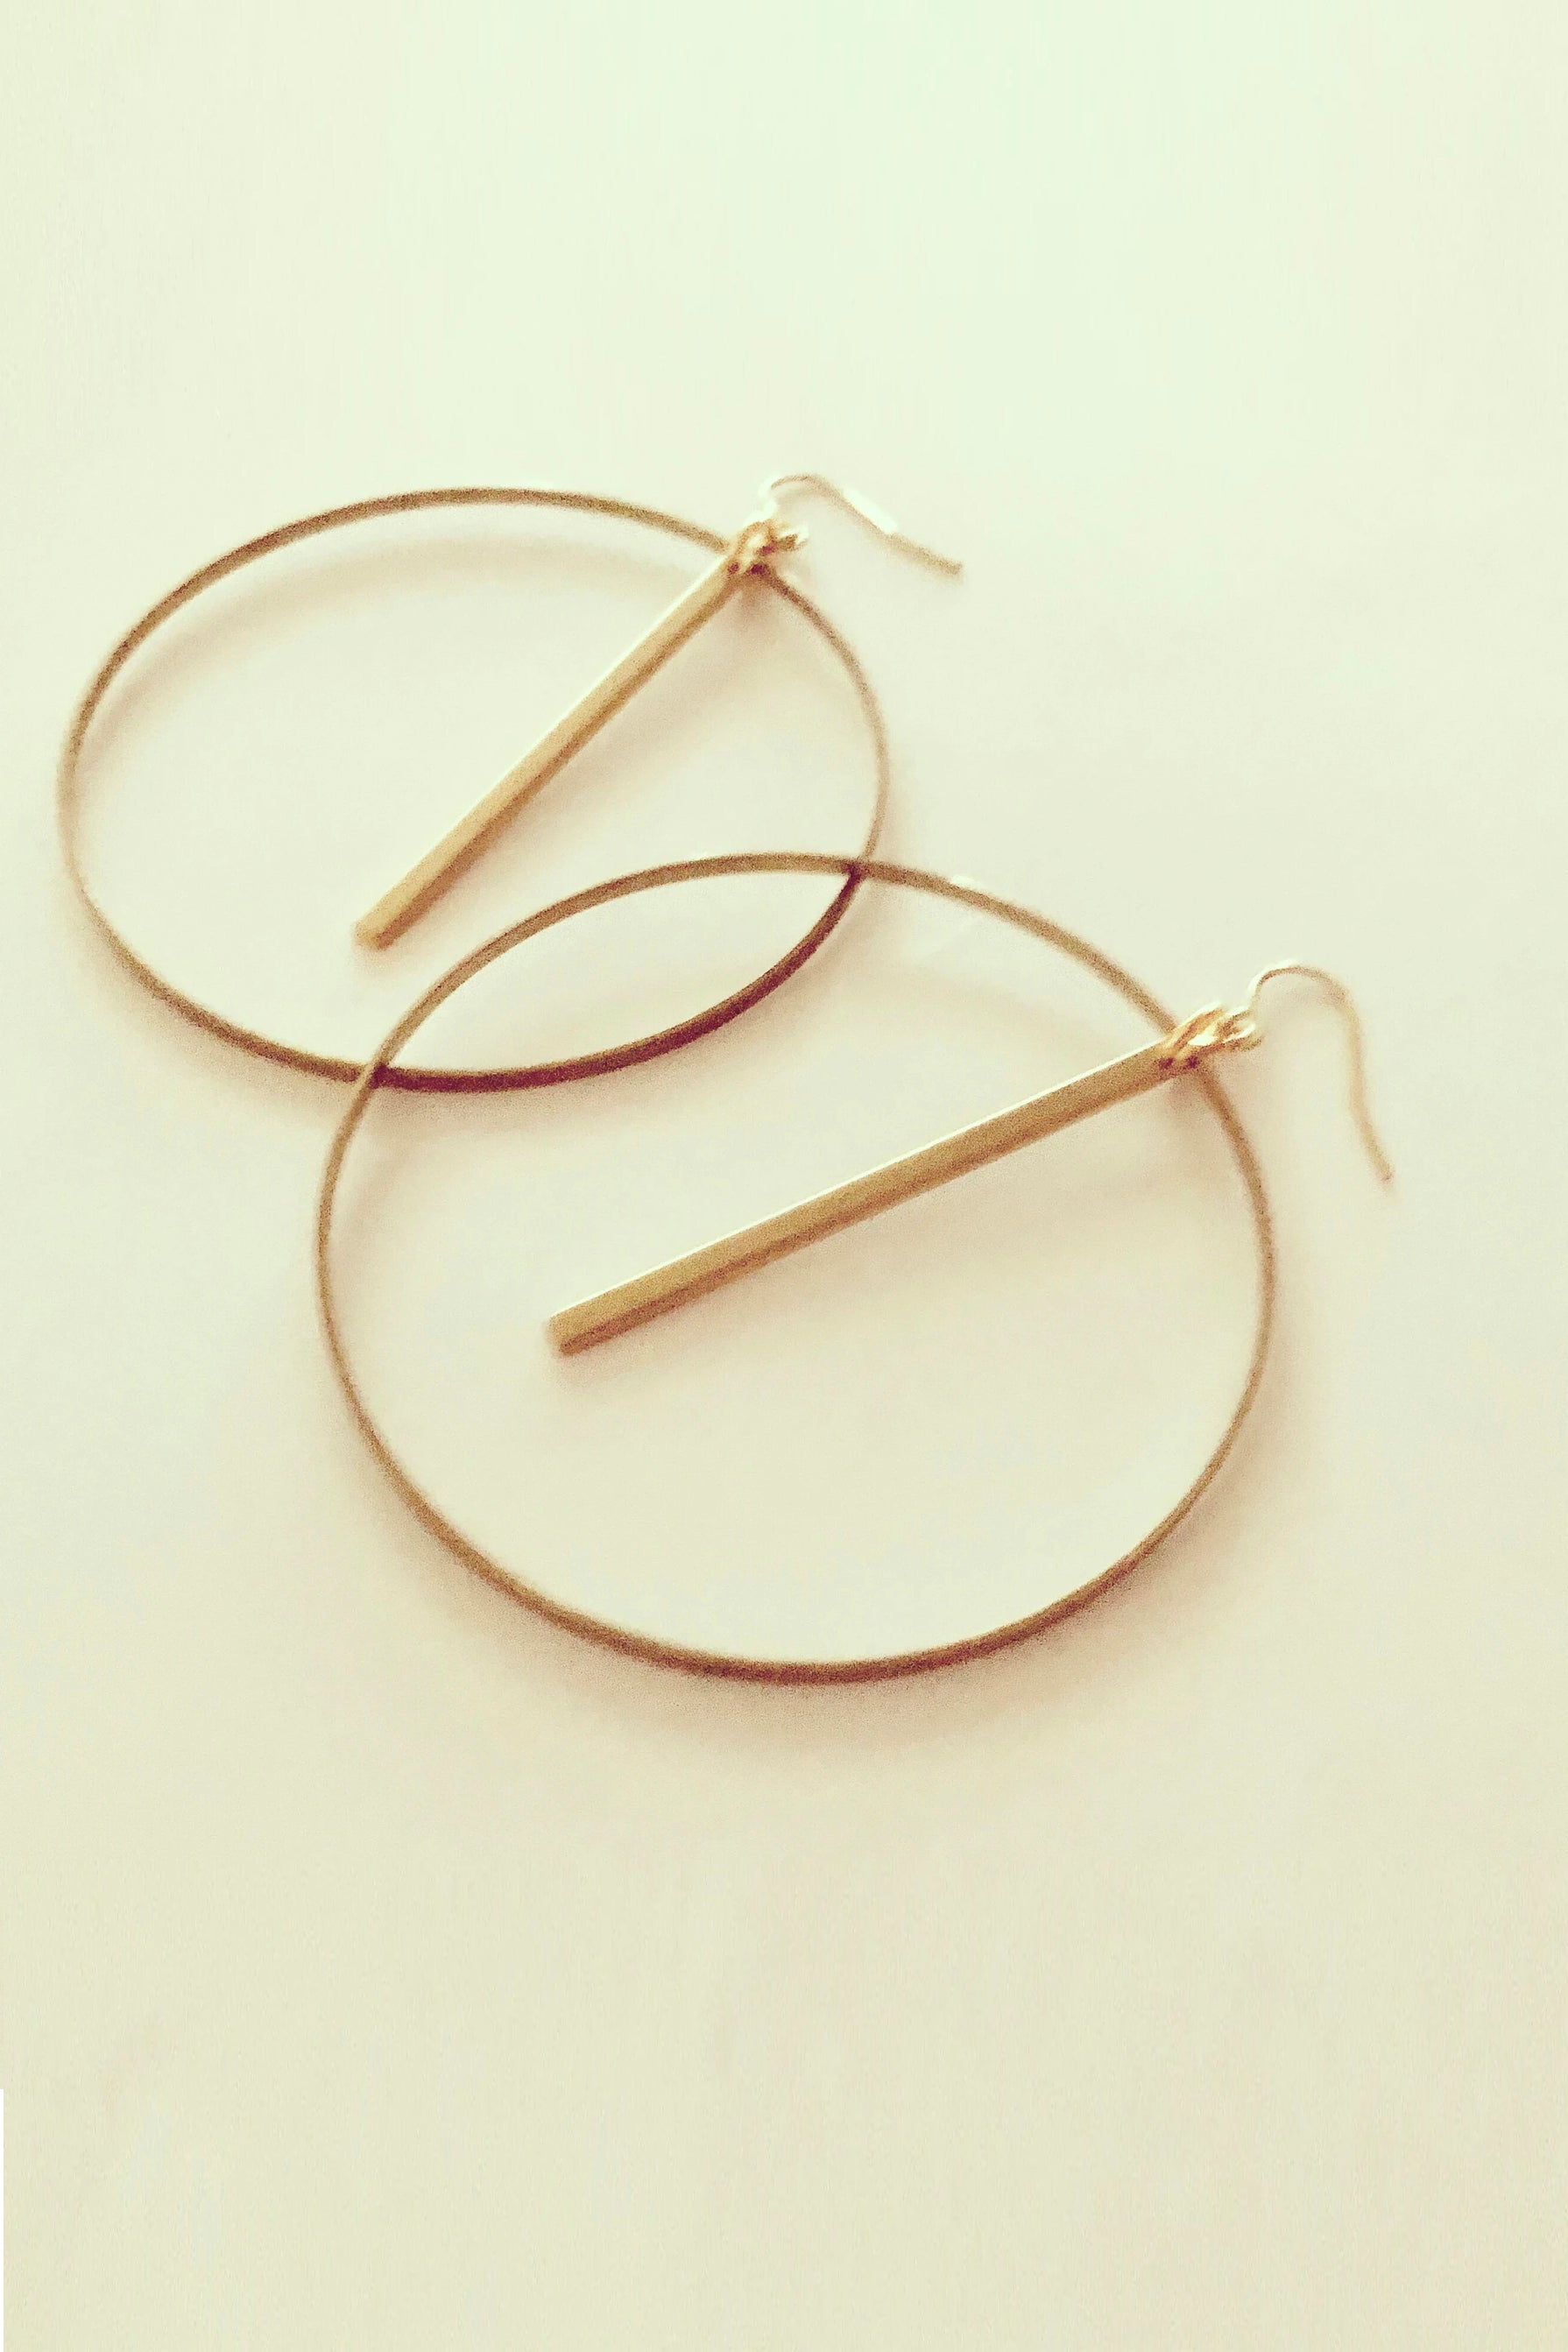 Myne by Darlings of Denmark; large, thin hoops with a hanging stick; raw brass; flat lay